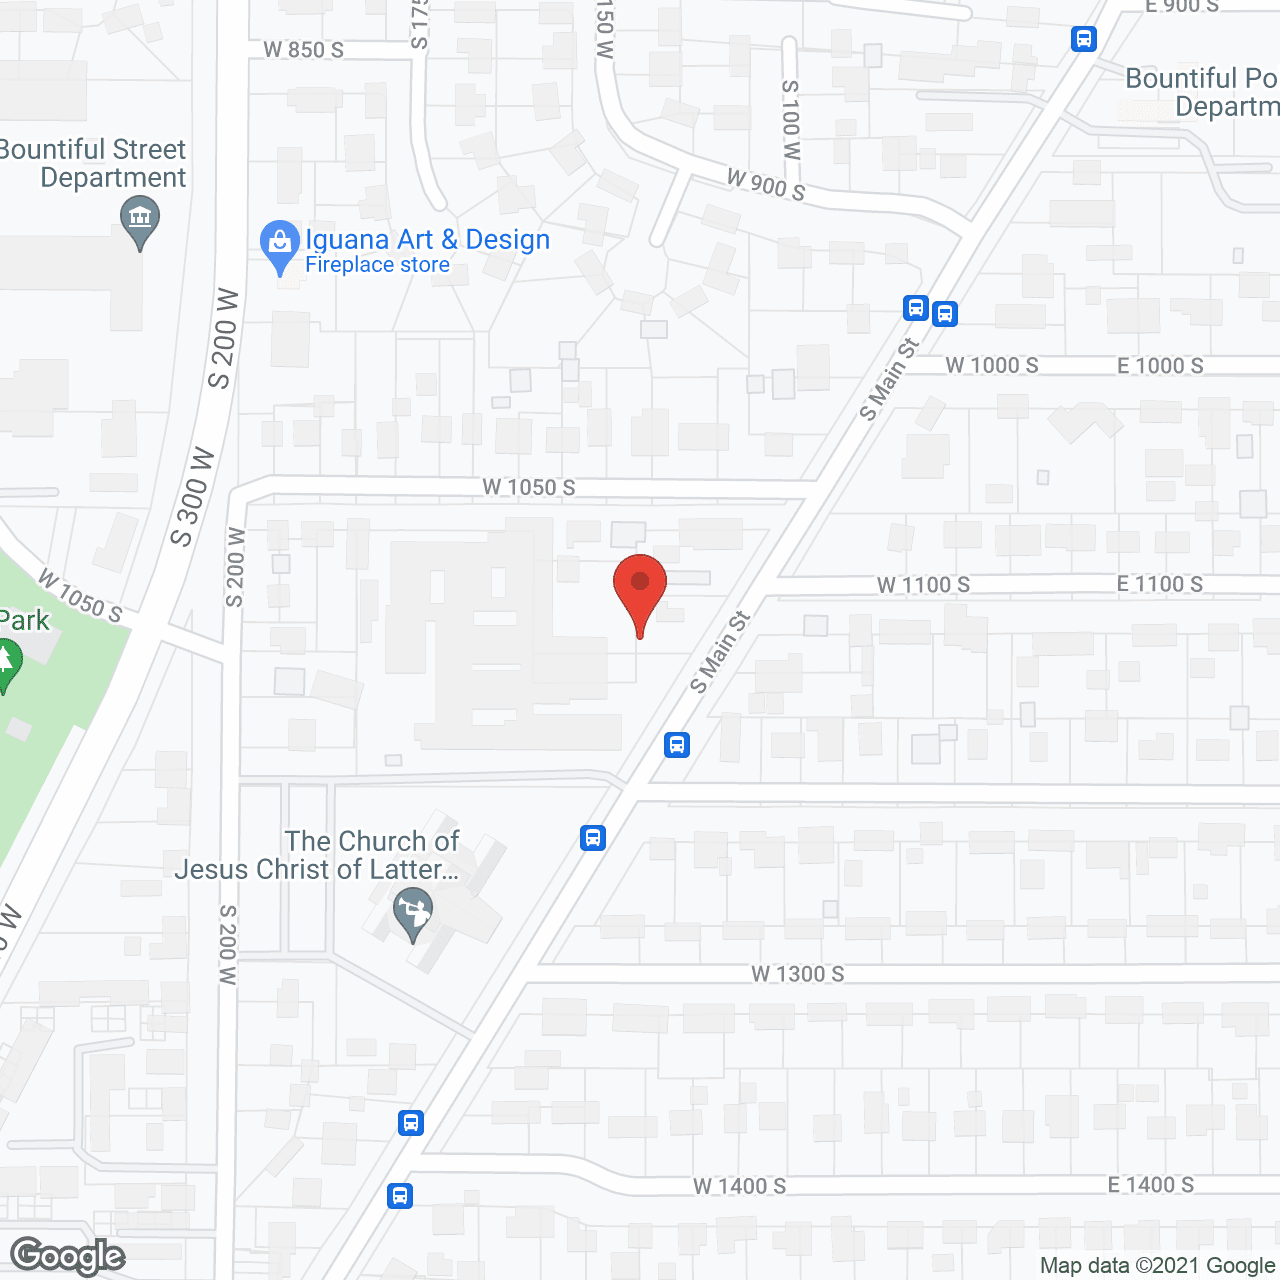 The Beaumont Assisted Living in google map